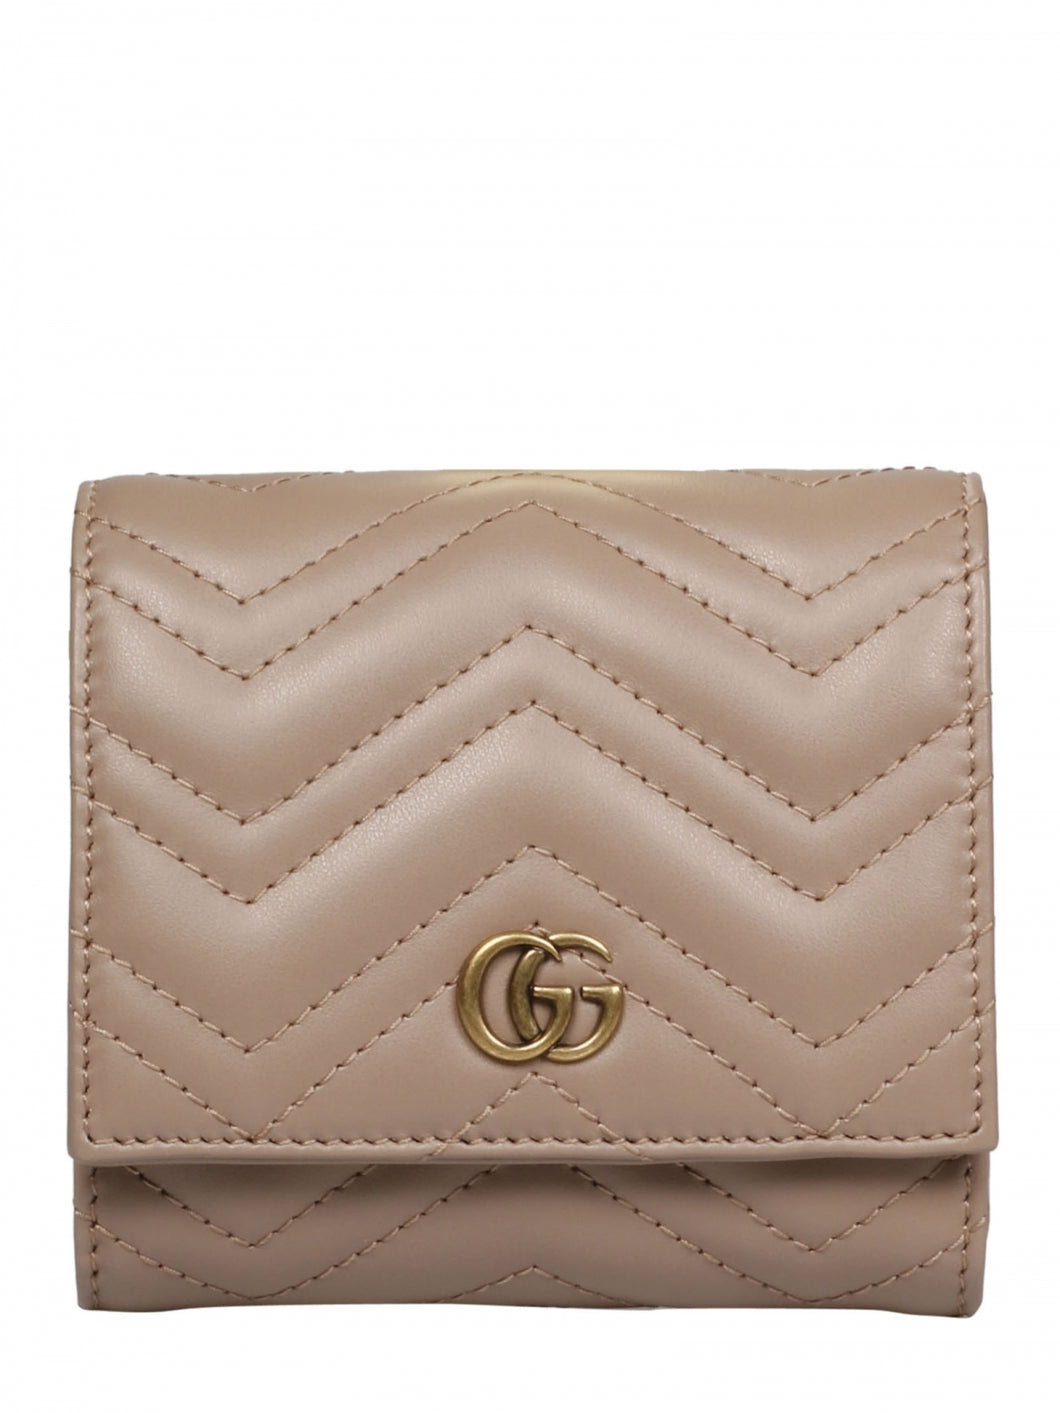 Gucci Chevron Marmont Wallet in Dusty Rose